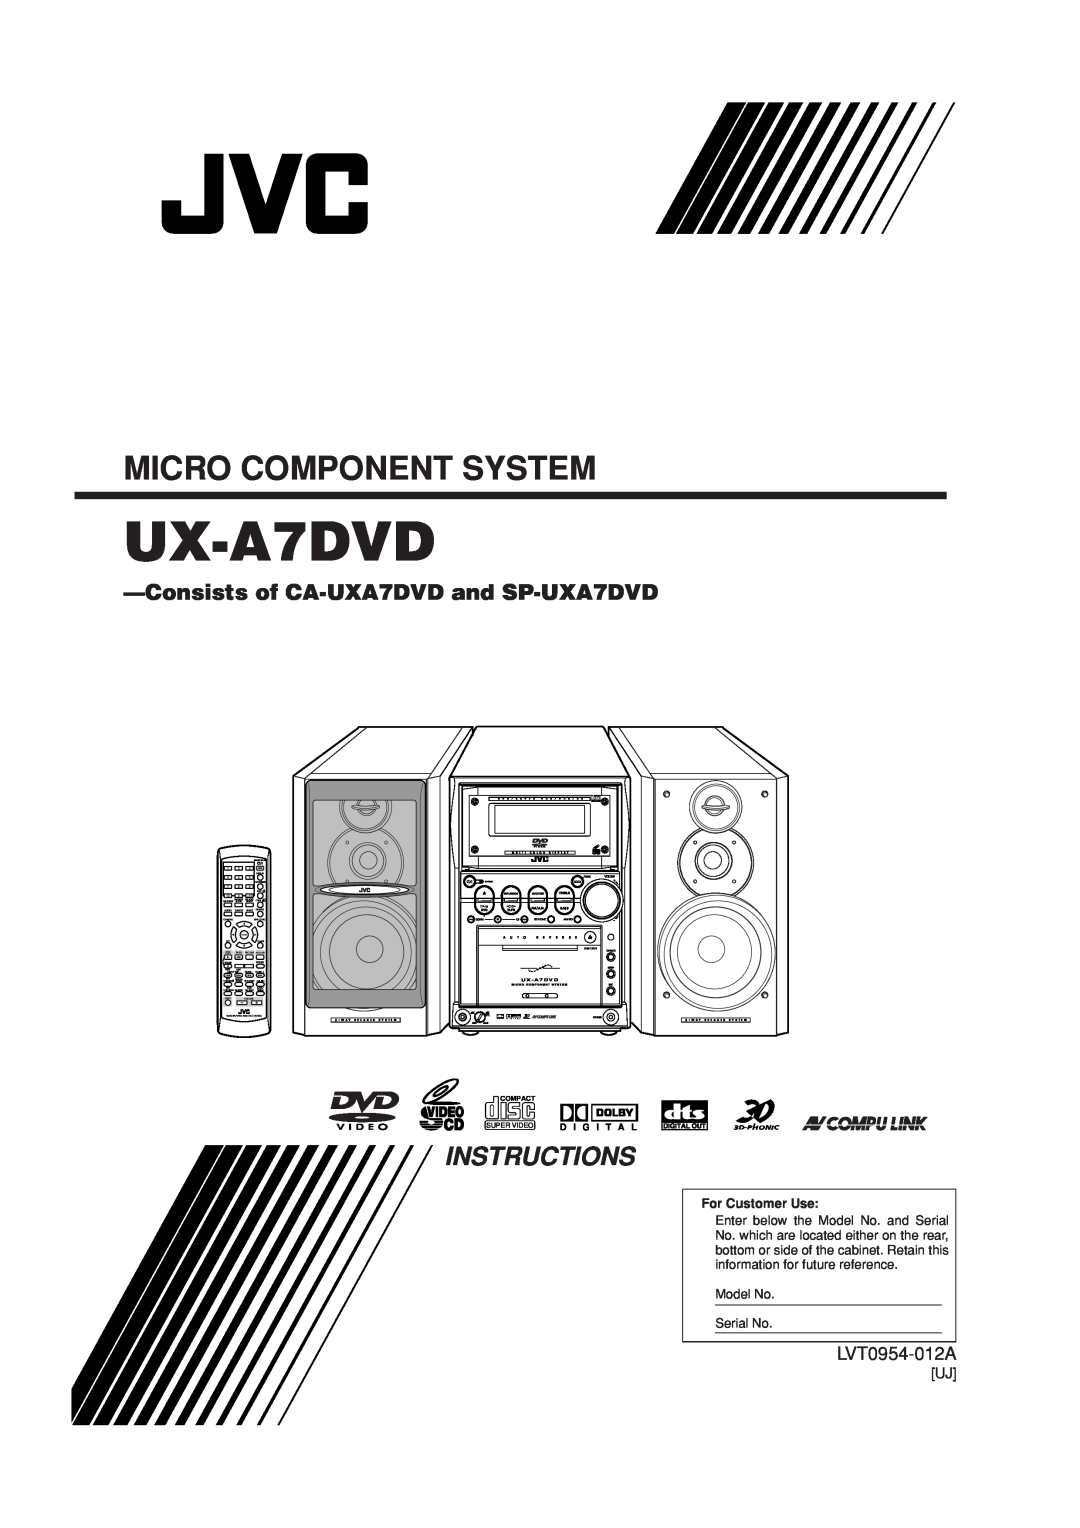 JVC manual Instructions, Consistsof CA-UXA7DVDand SP-UXA7DVD, UX-A7DVD, Micro Component System, LVT0954-012A, Compact 